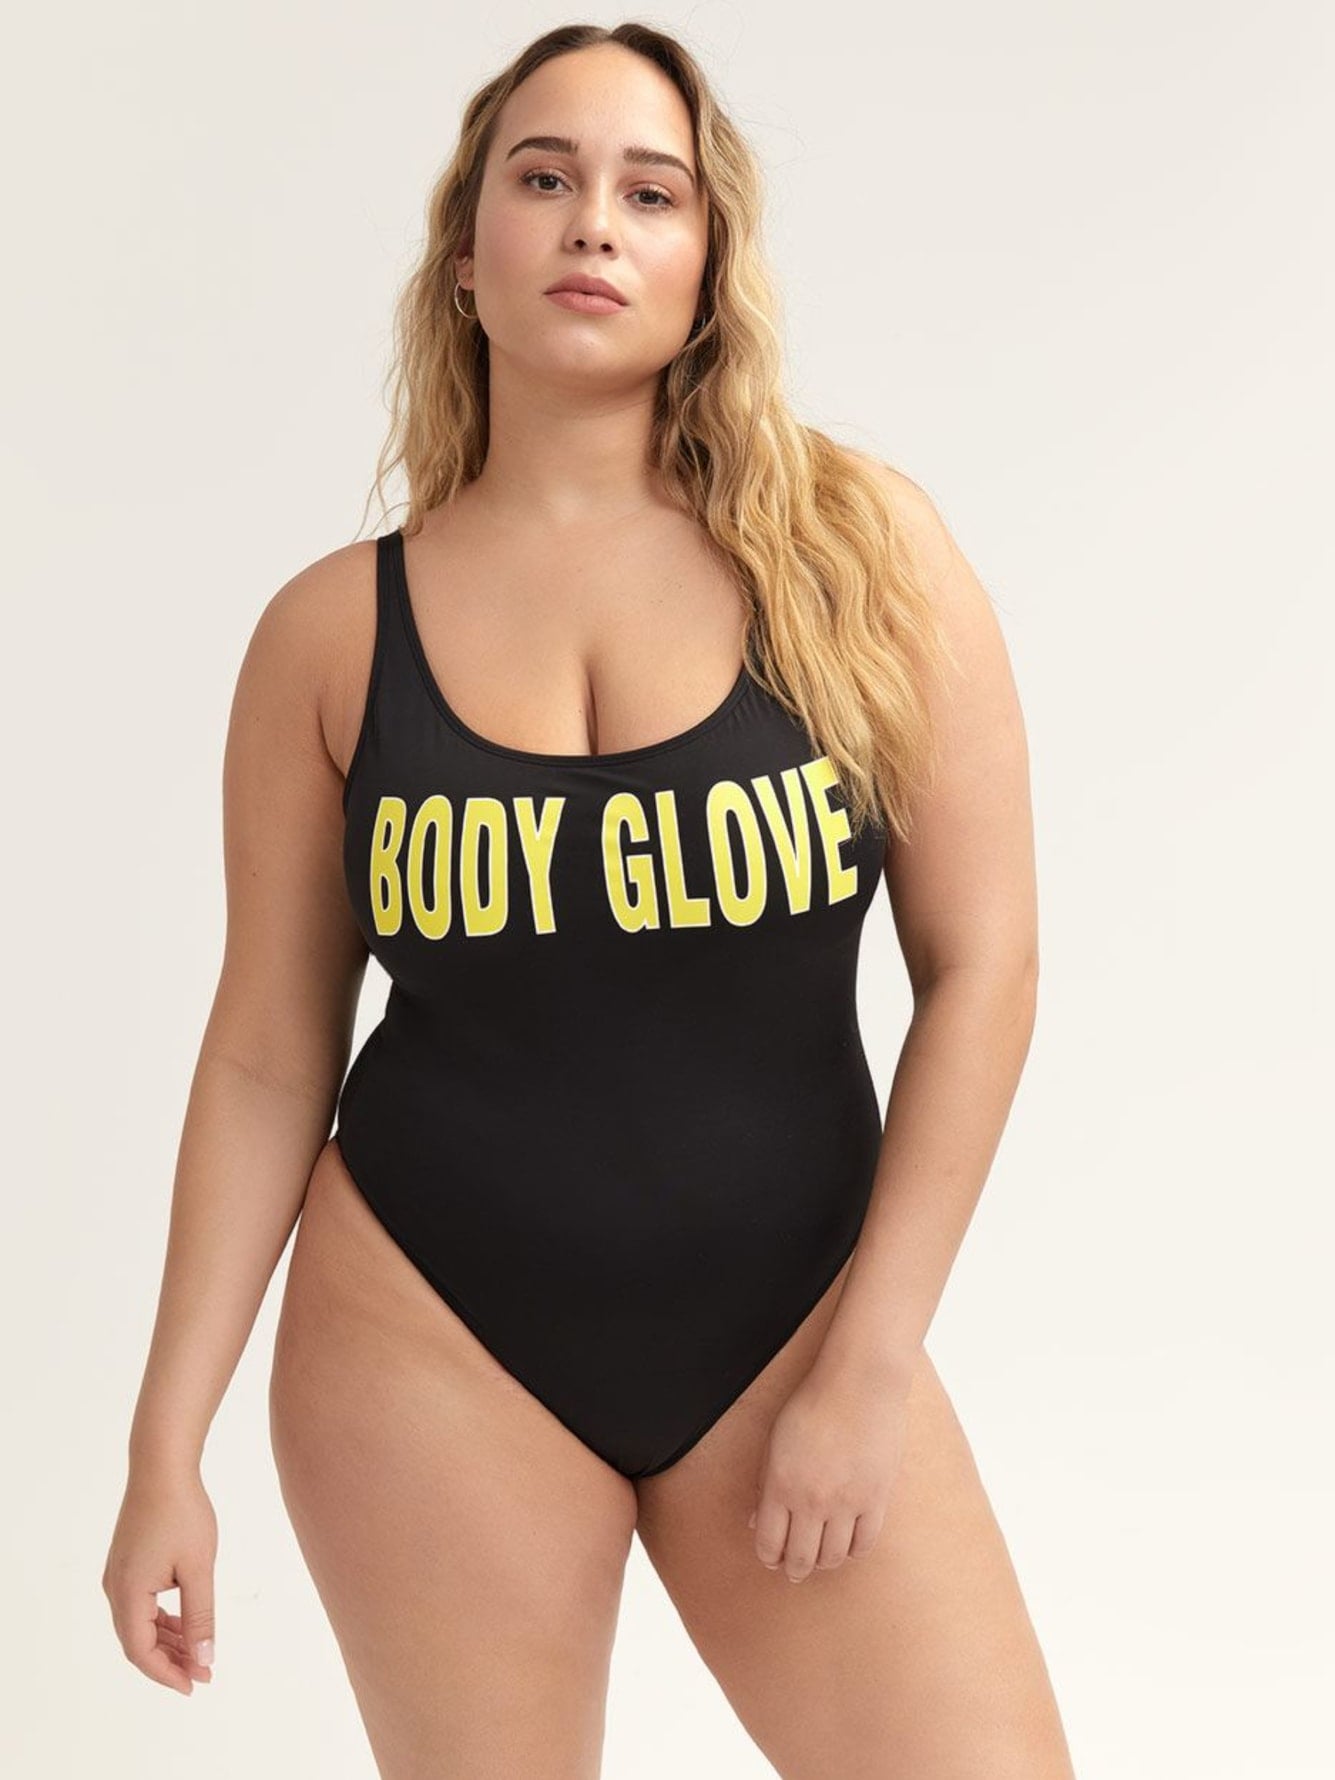 Body Glove, Smoothies The Look - One Piece Swimsuit, Body Glove's  Additional Elle Swimwear Is Here to Hug Your Curves in All the Right Places